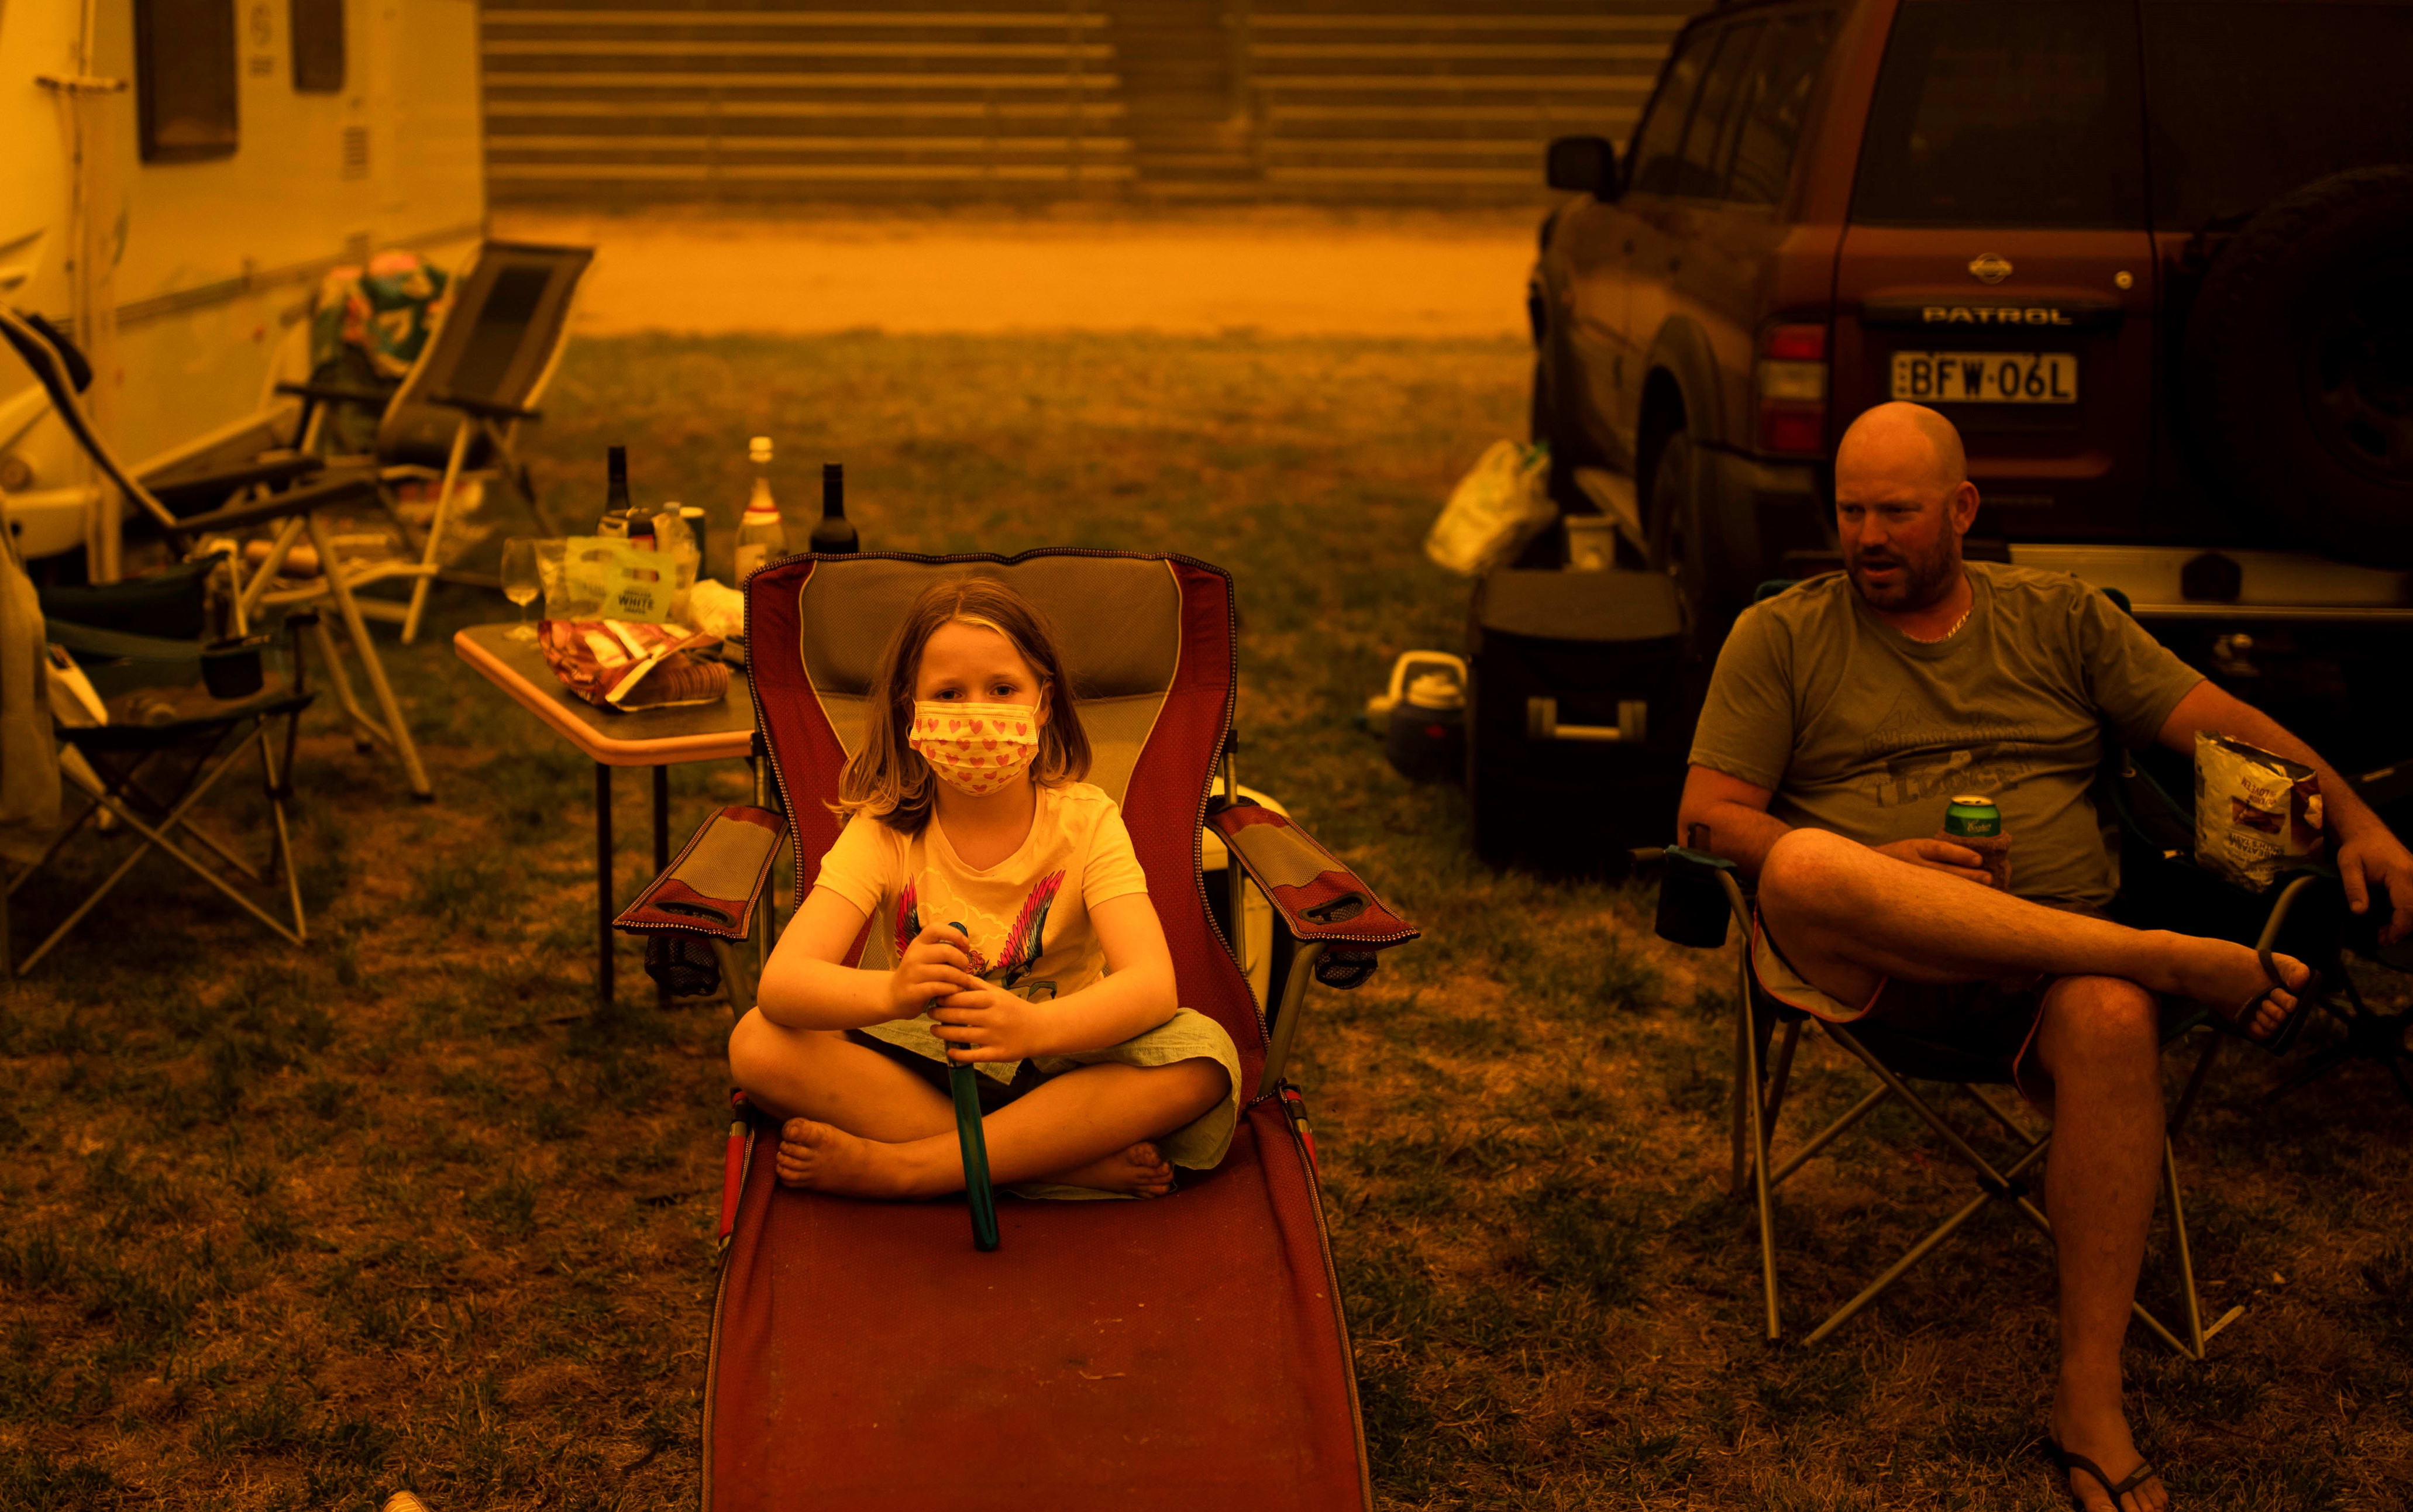 Amy (L) and Ben Spencer sit at the showgrounds in Bega, New South Wales, where they are camping after being evacuated from nearby sites affected by bushfires on December 31, 2019.